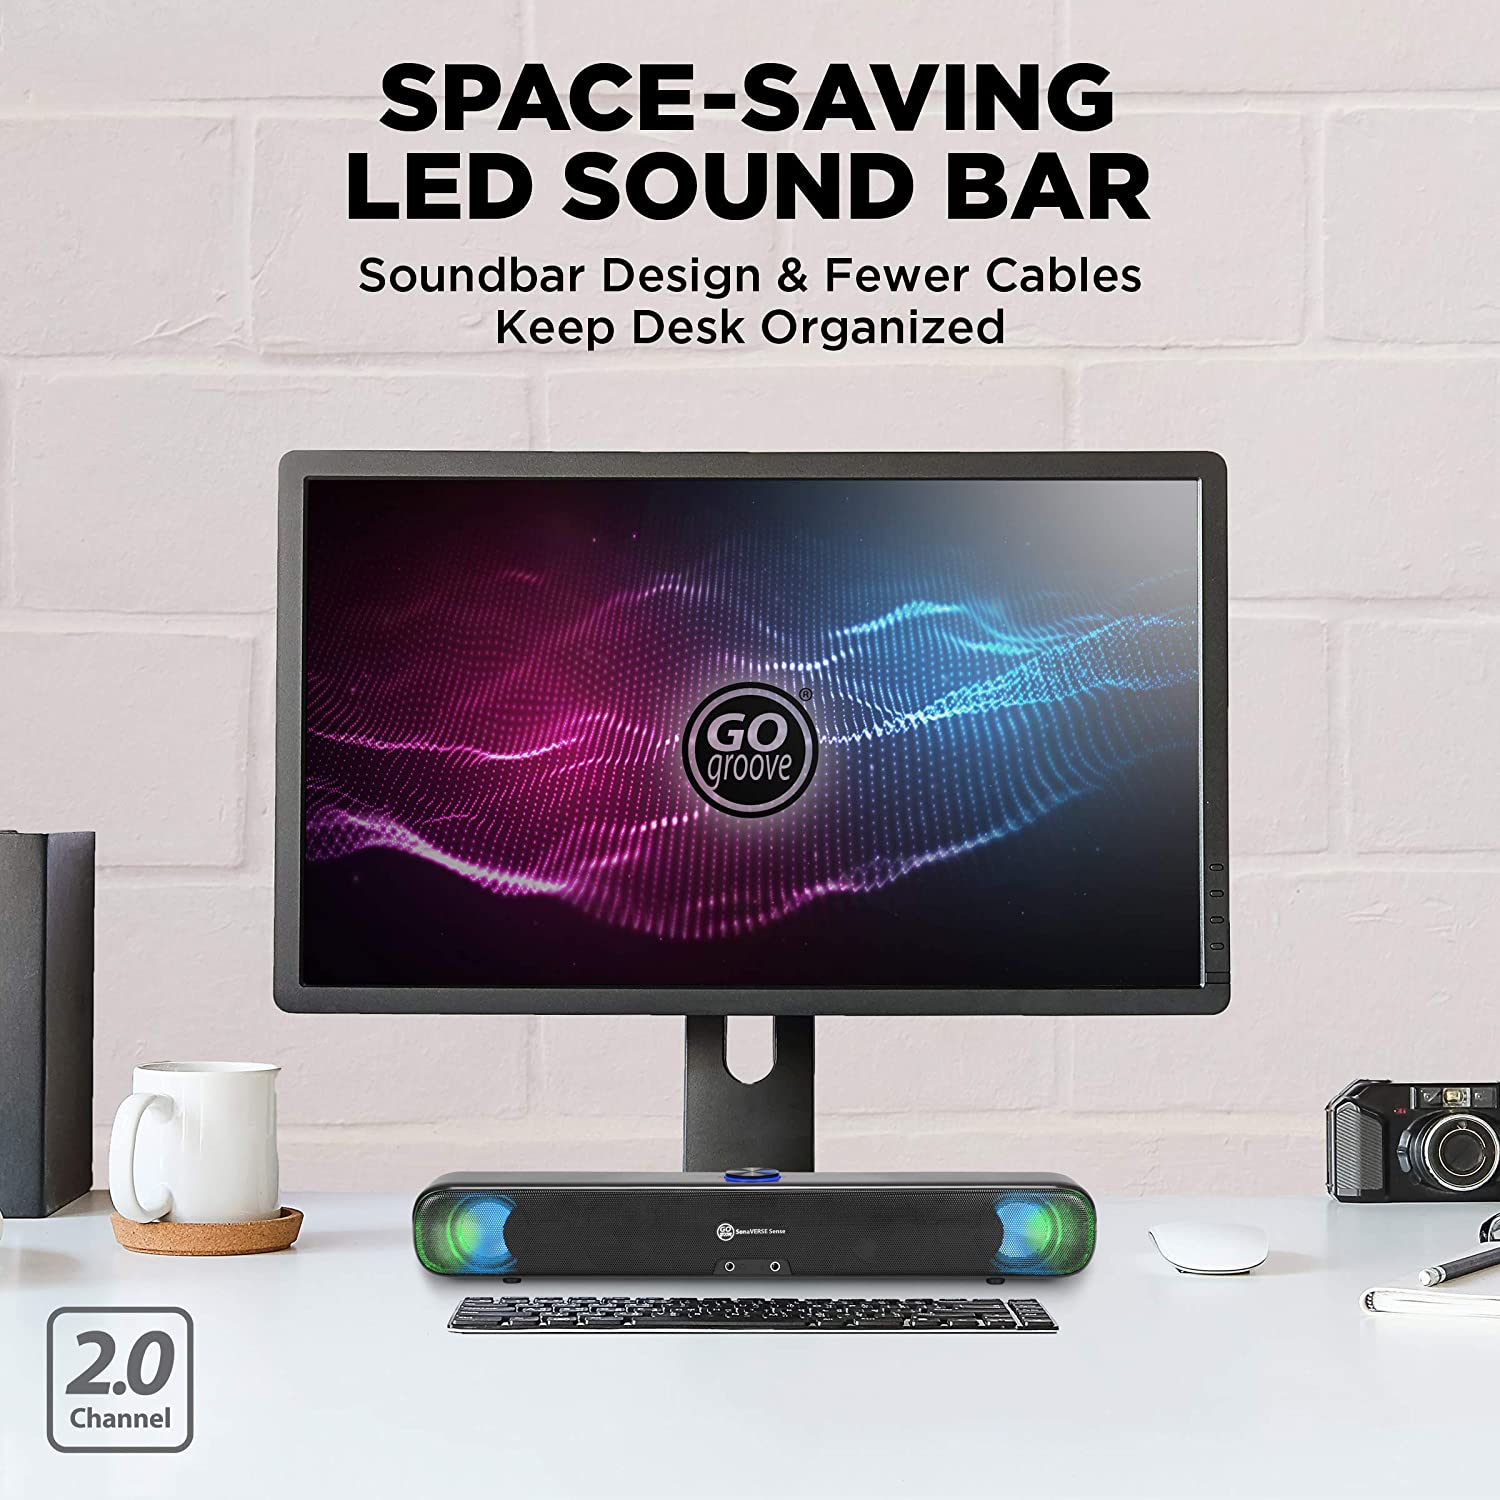 GOgroove Computer Speaker LED Sound Bar - SonaVERSE Sense USB Powered Desktop Computer Speaker for PC, Laptop with Glowing LED Lights, Stereo Drivers, Headphone and Microphone Ports, Wired AUX Input - image 3 of 9